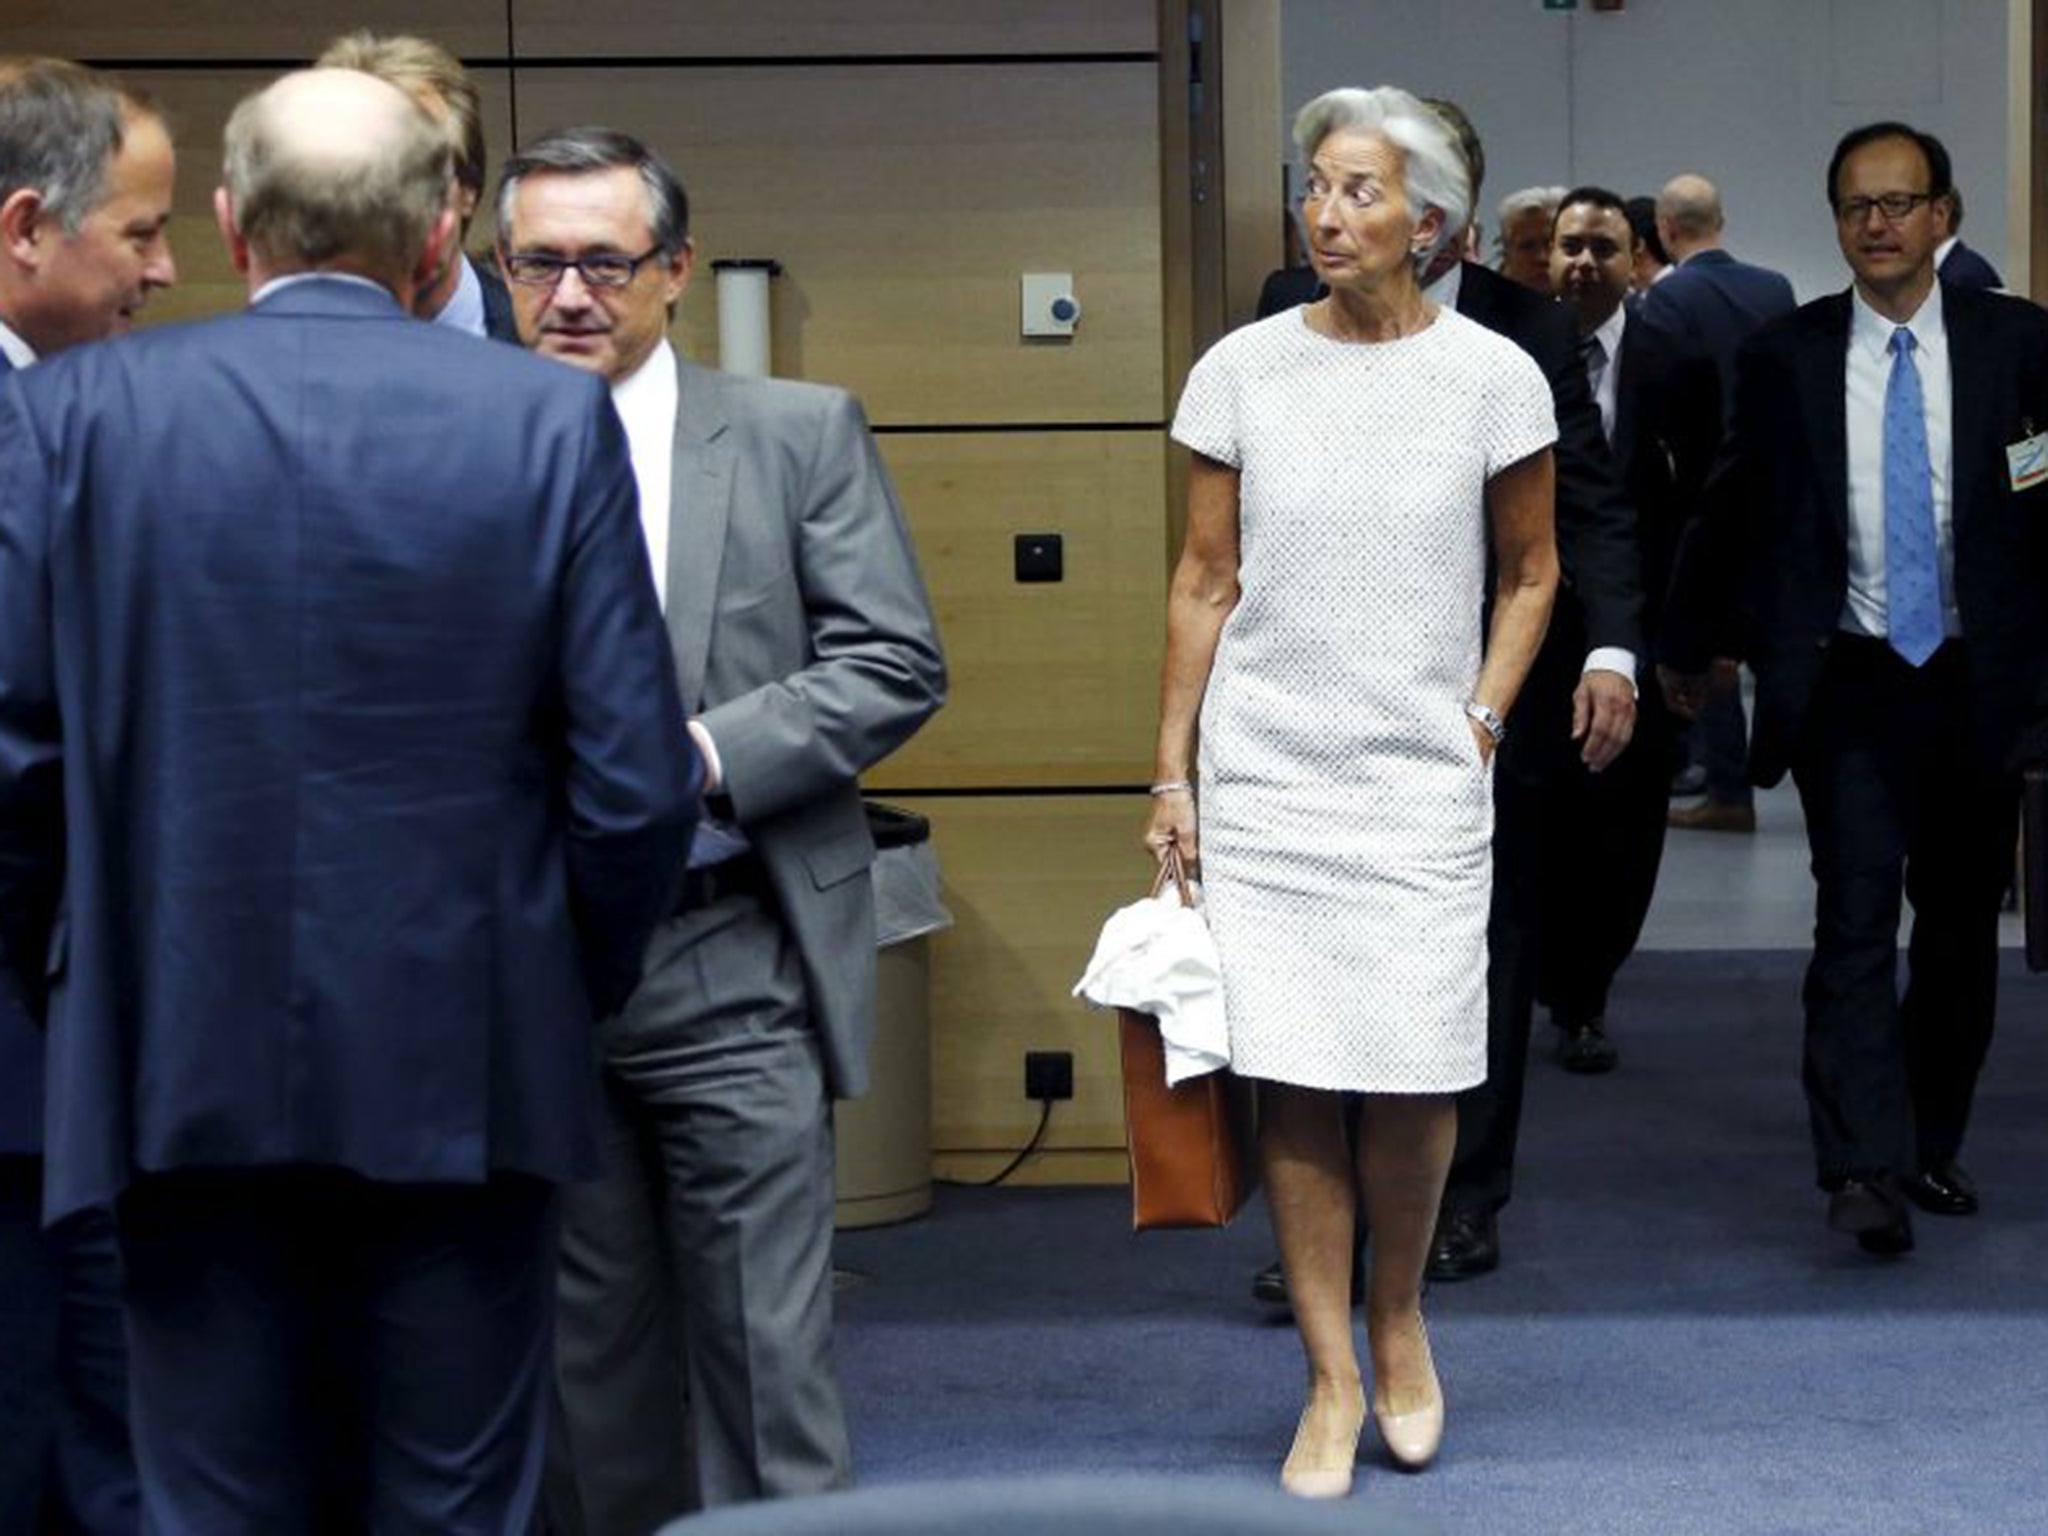 IMF Managing Director Christine Lagarde arriving to attend the eurozone finance ministers meeting in Brussels on Saturday